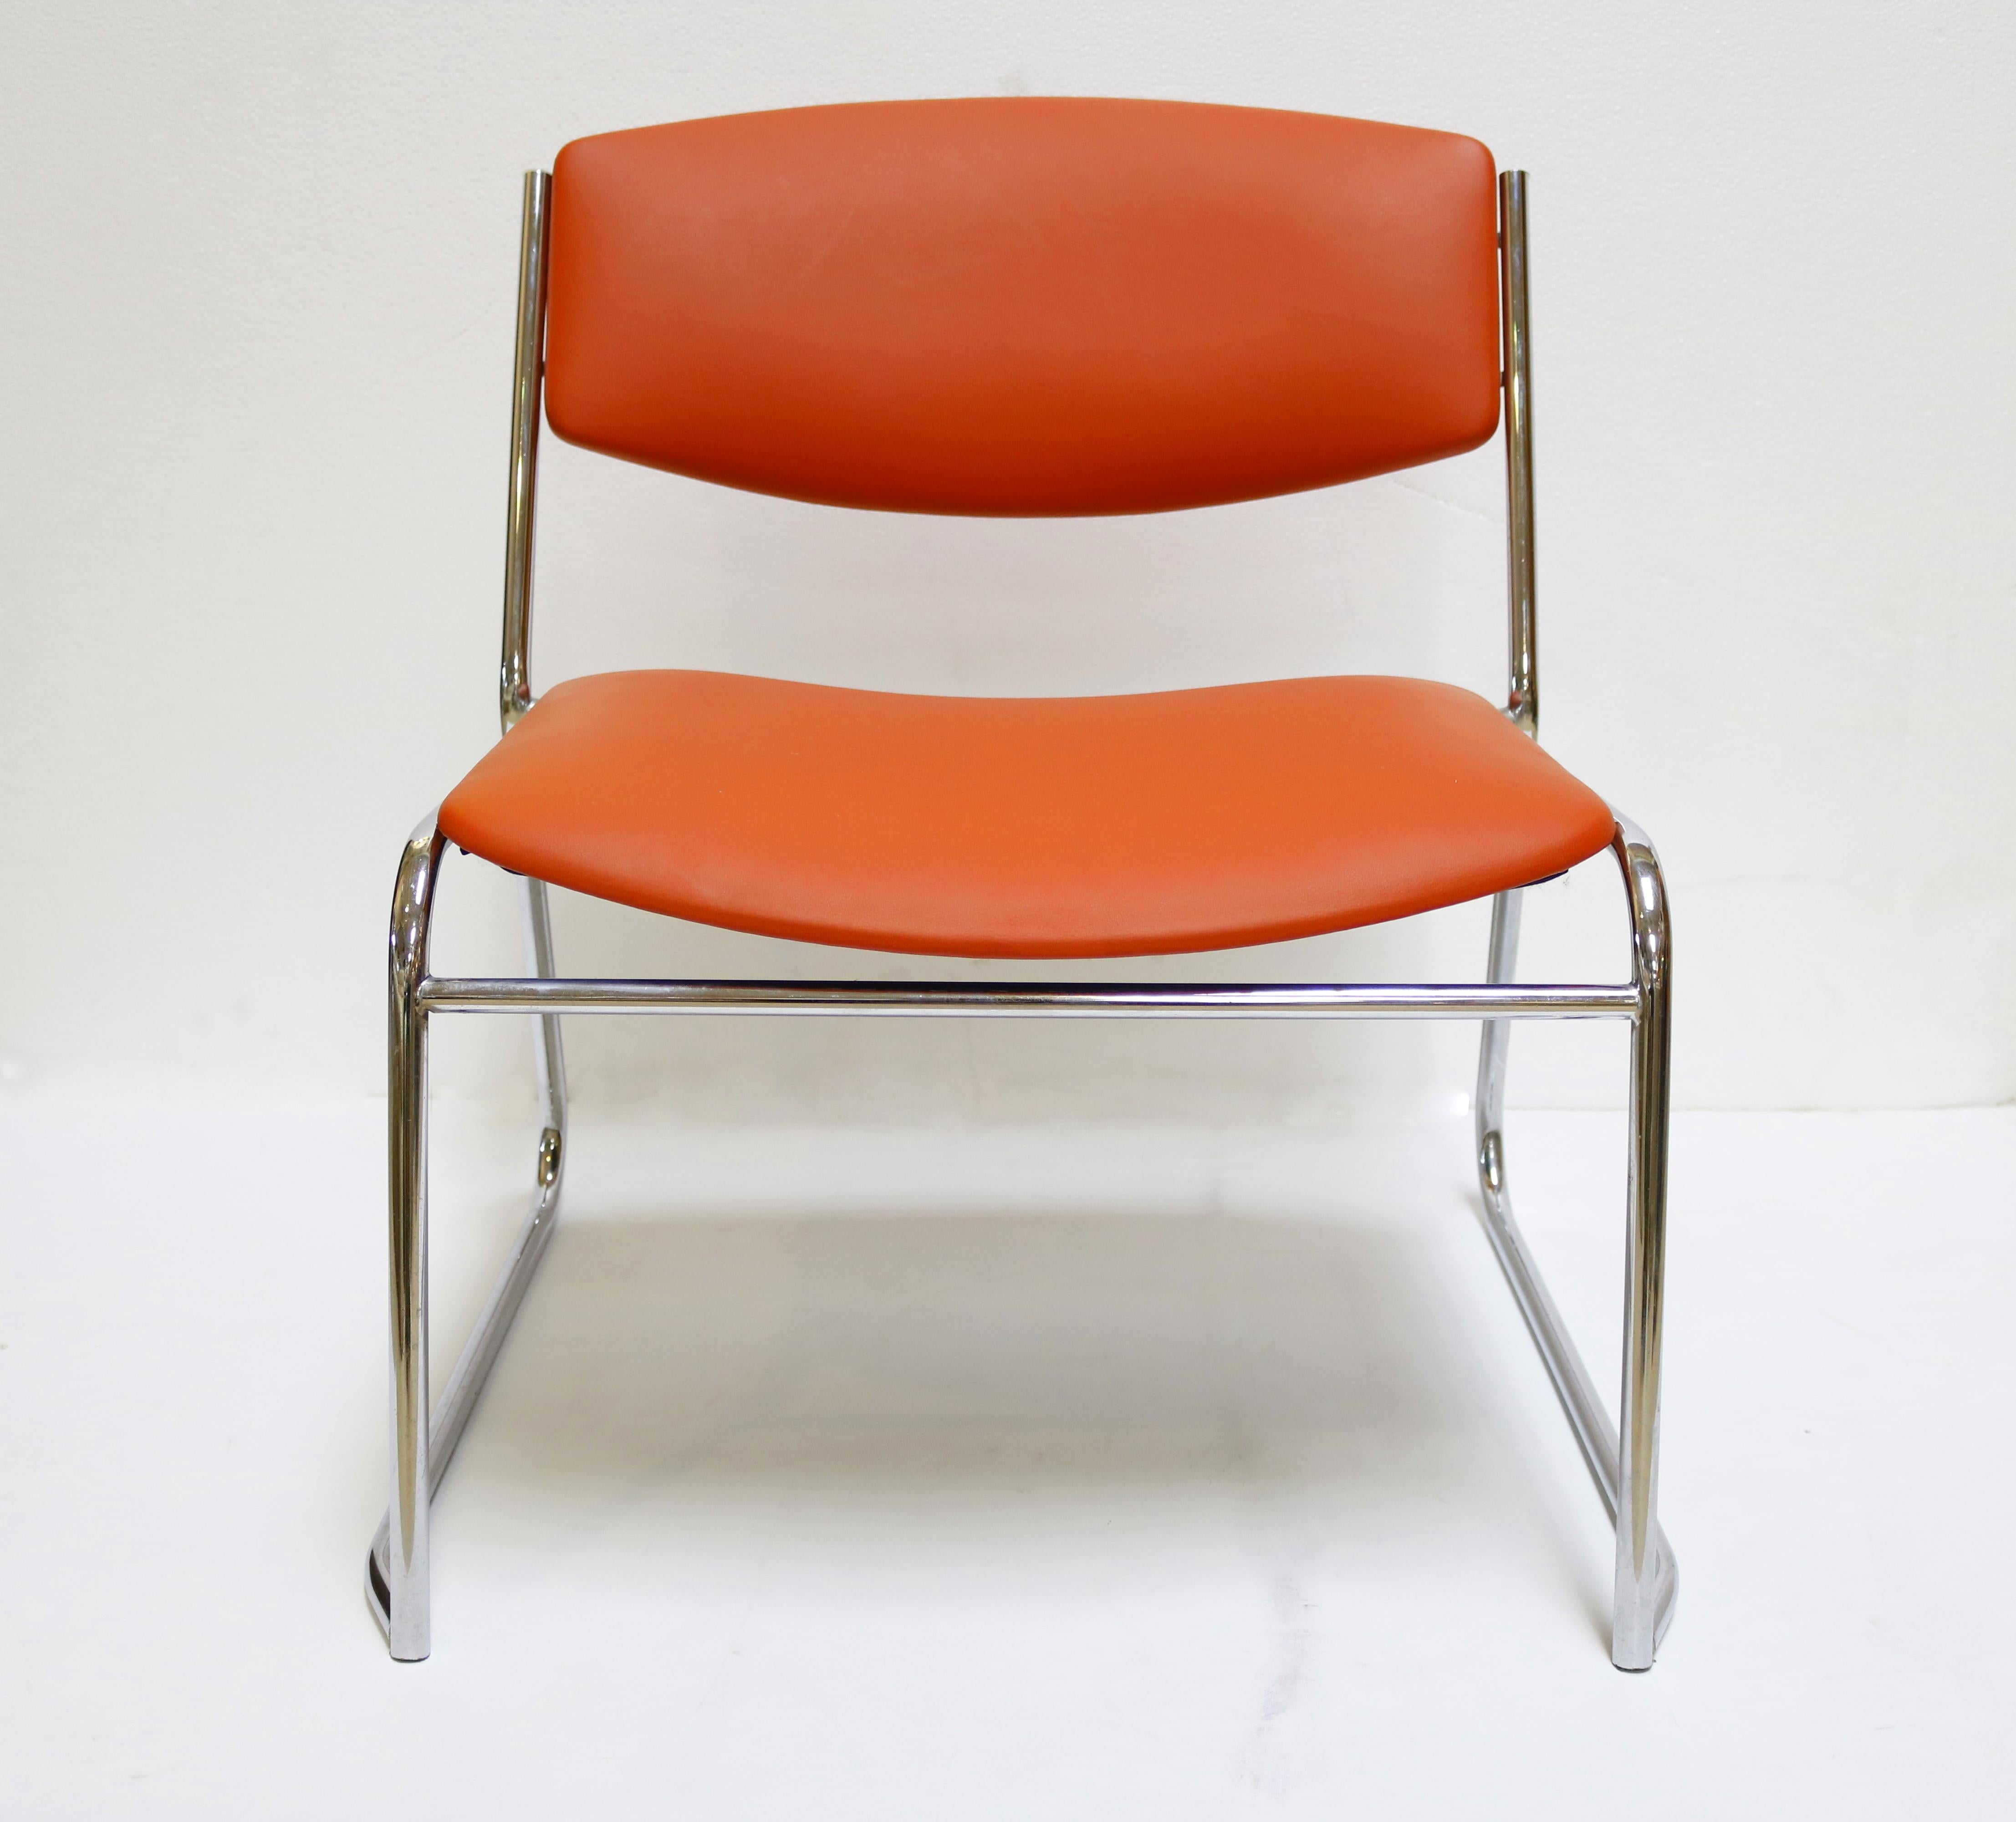 These sleek, chrome framed slipper chairs are upholstered in orange-red fabric and lean back in lounge fashion.
They are very comfortable!